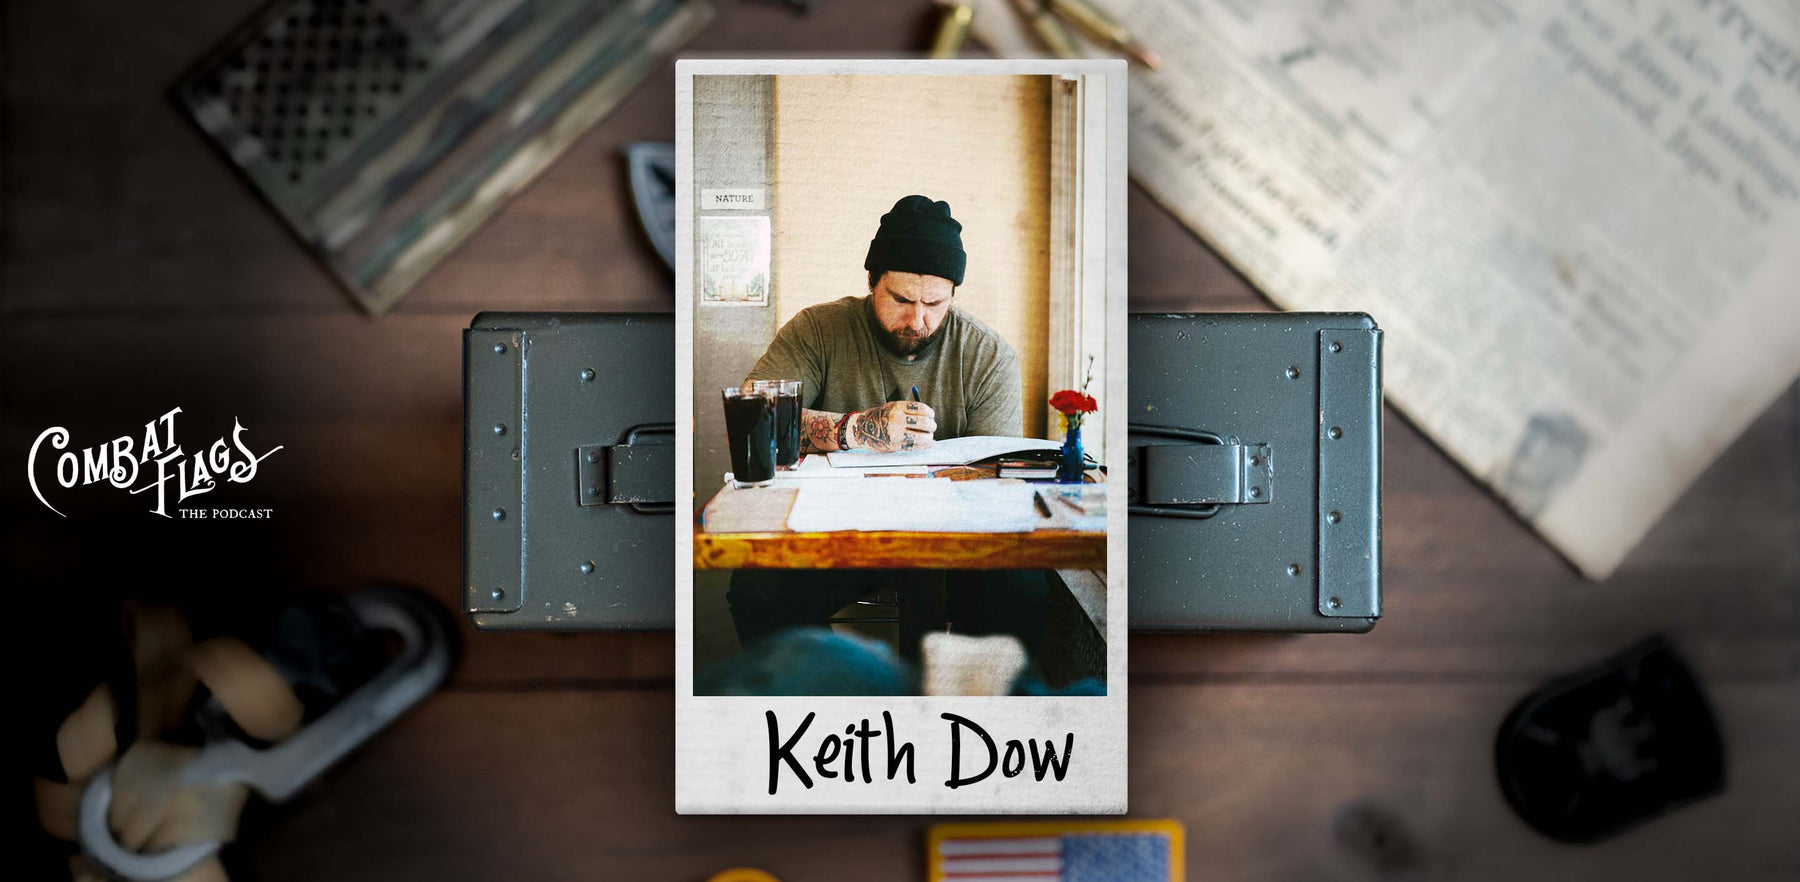 022: Keith Dow